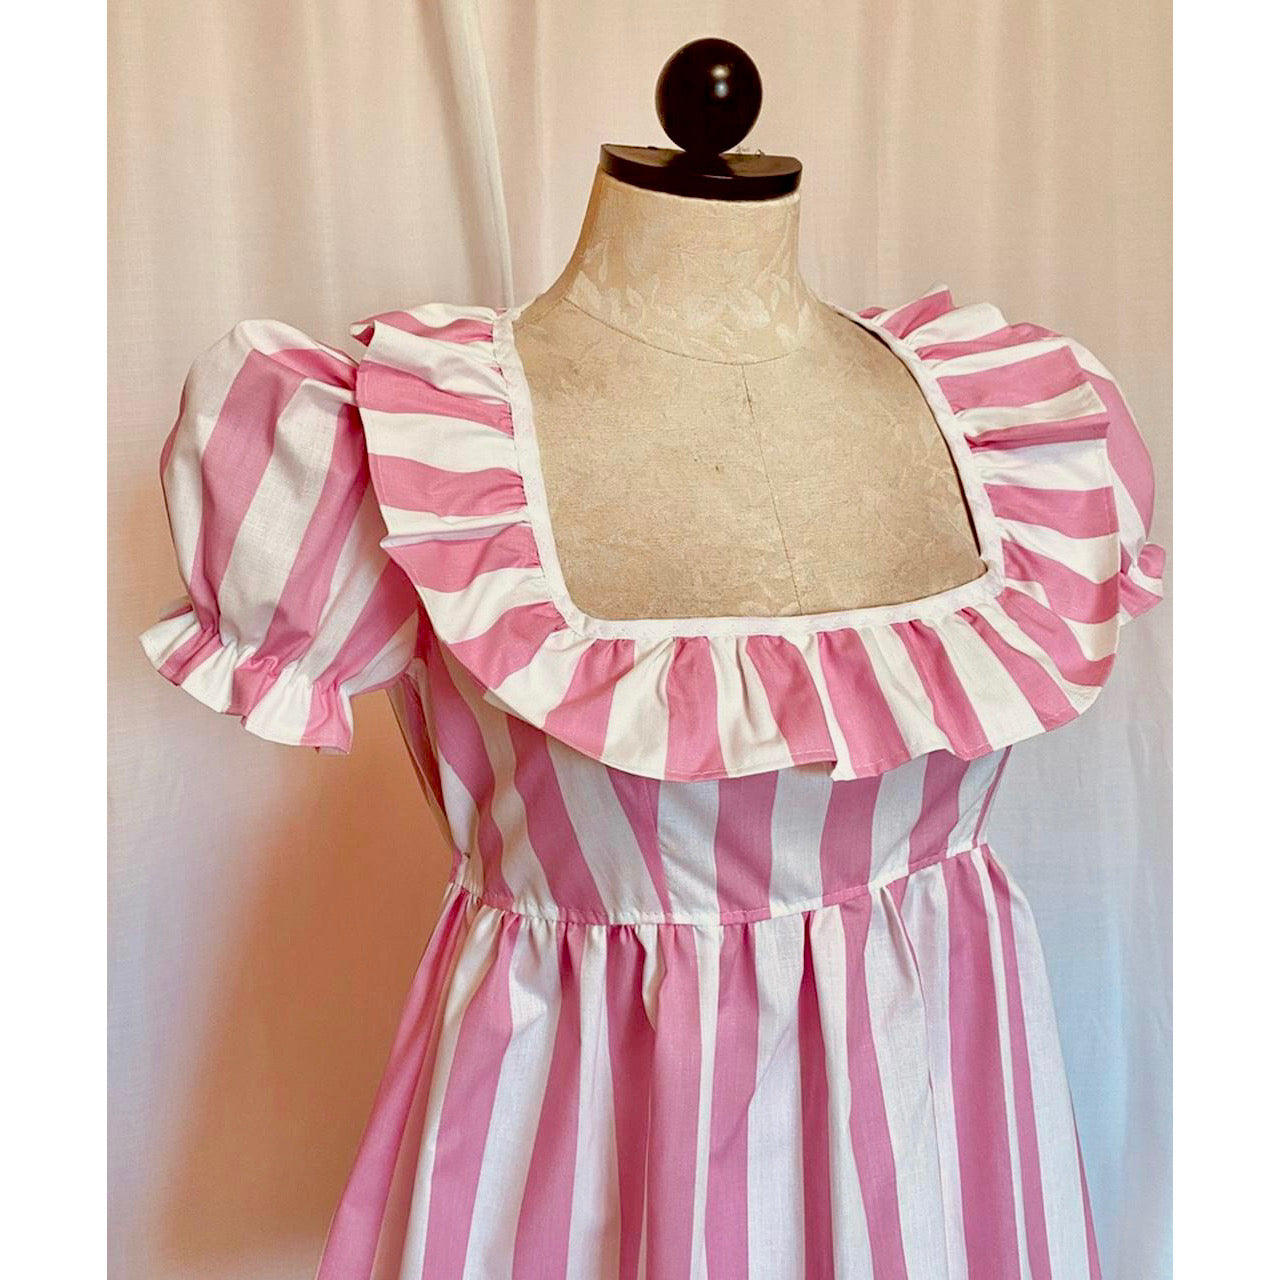 The Mia Square Dance Dress in Pink and White